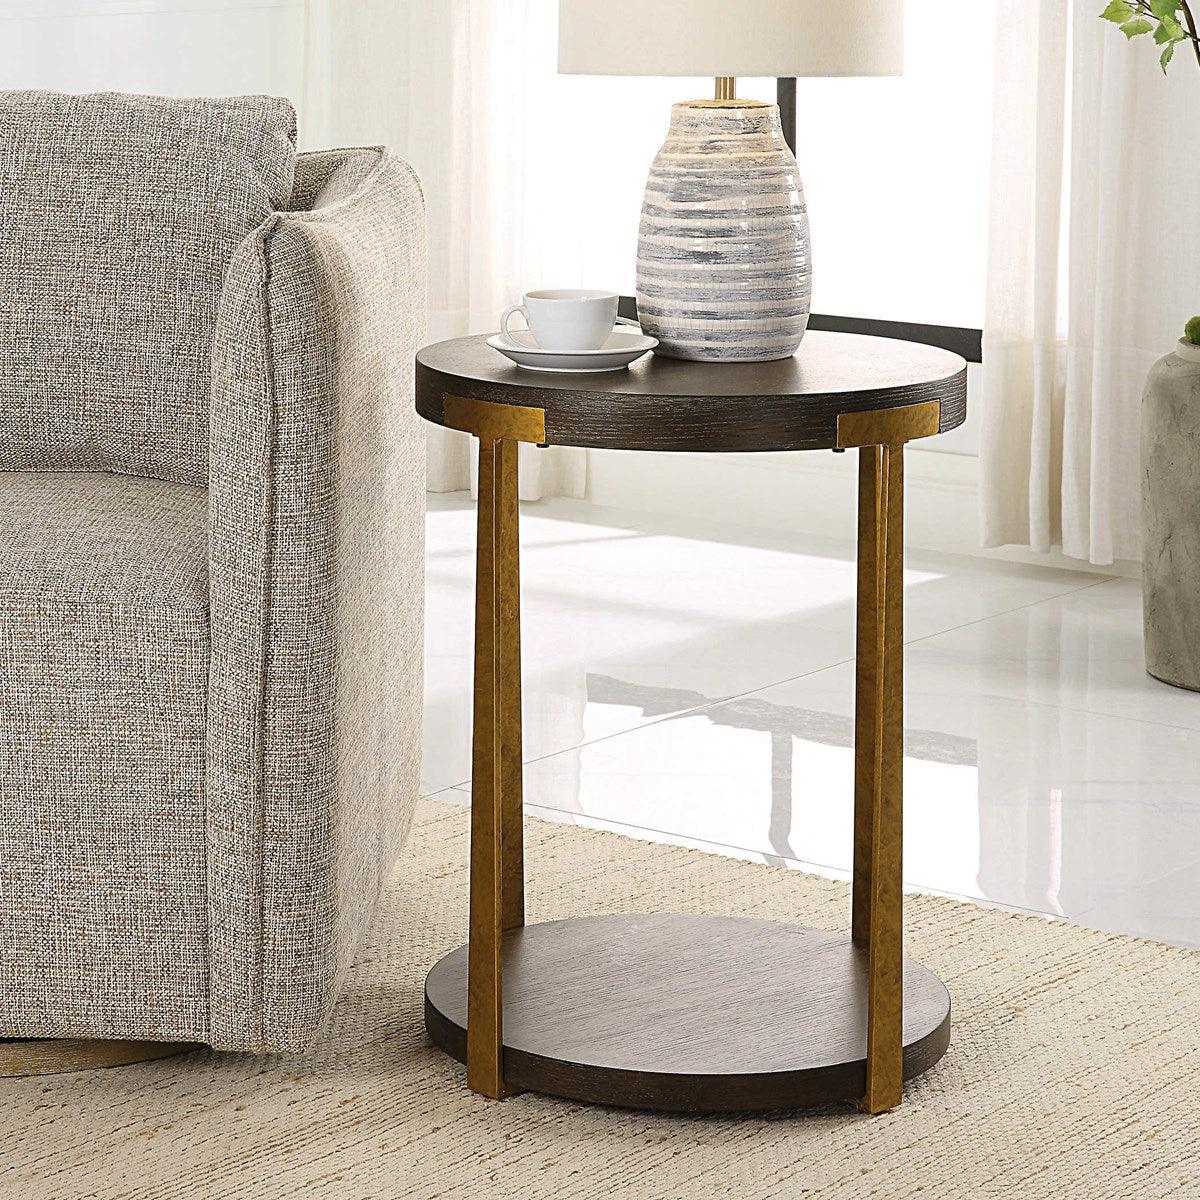 The Uttermost - Palisade Side Table - 25554 | Montreal Lighting & Hardware